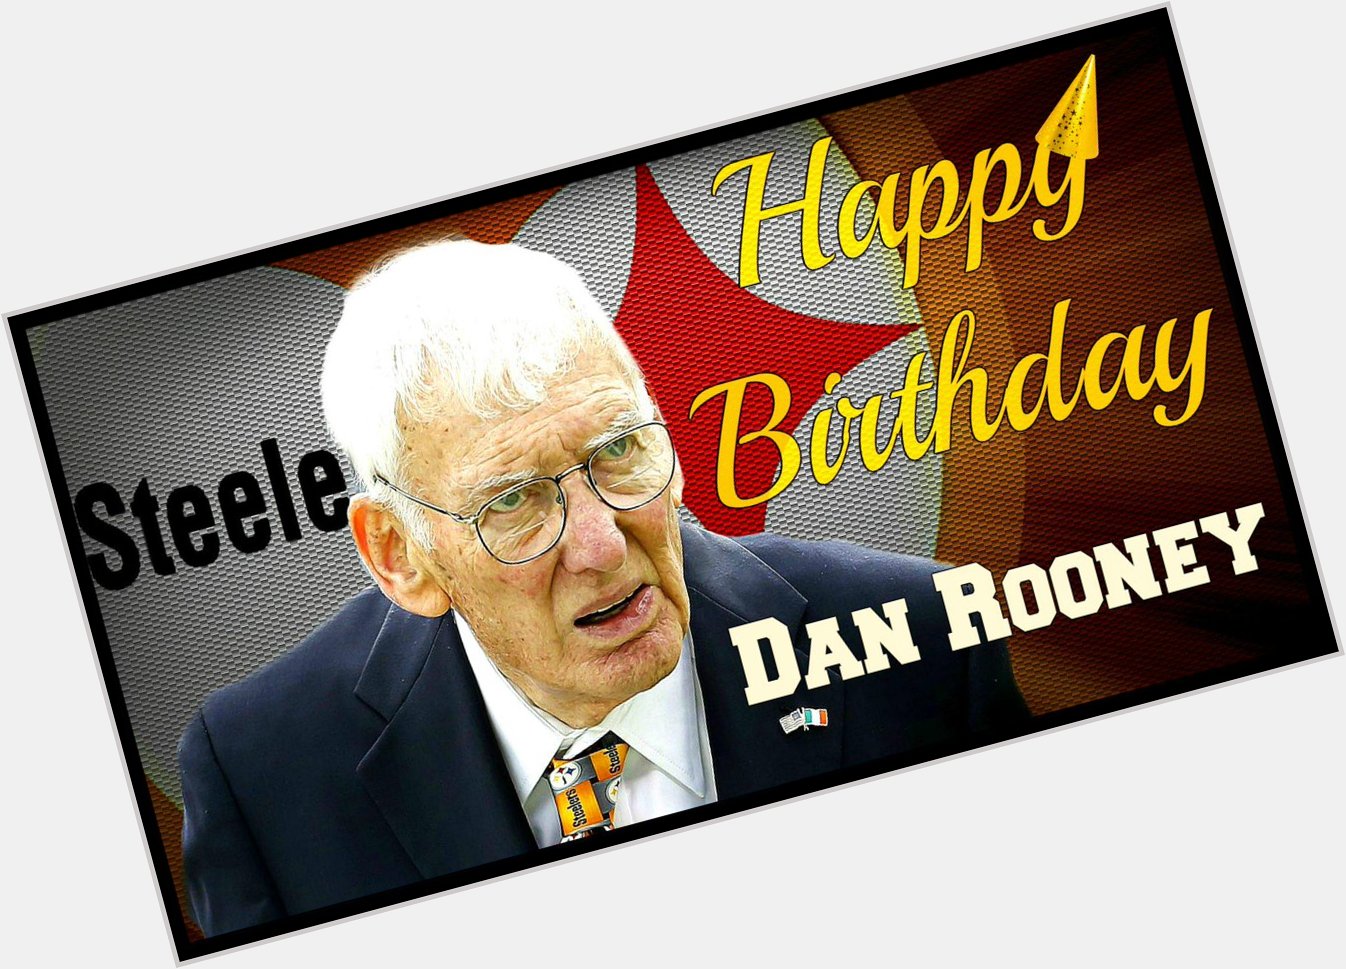 Wishing the Chairman of the Pittsburgh Steelers Dan Rooney a very Happy 83rd BDay!  